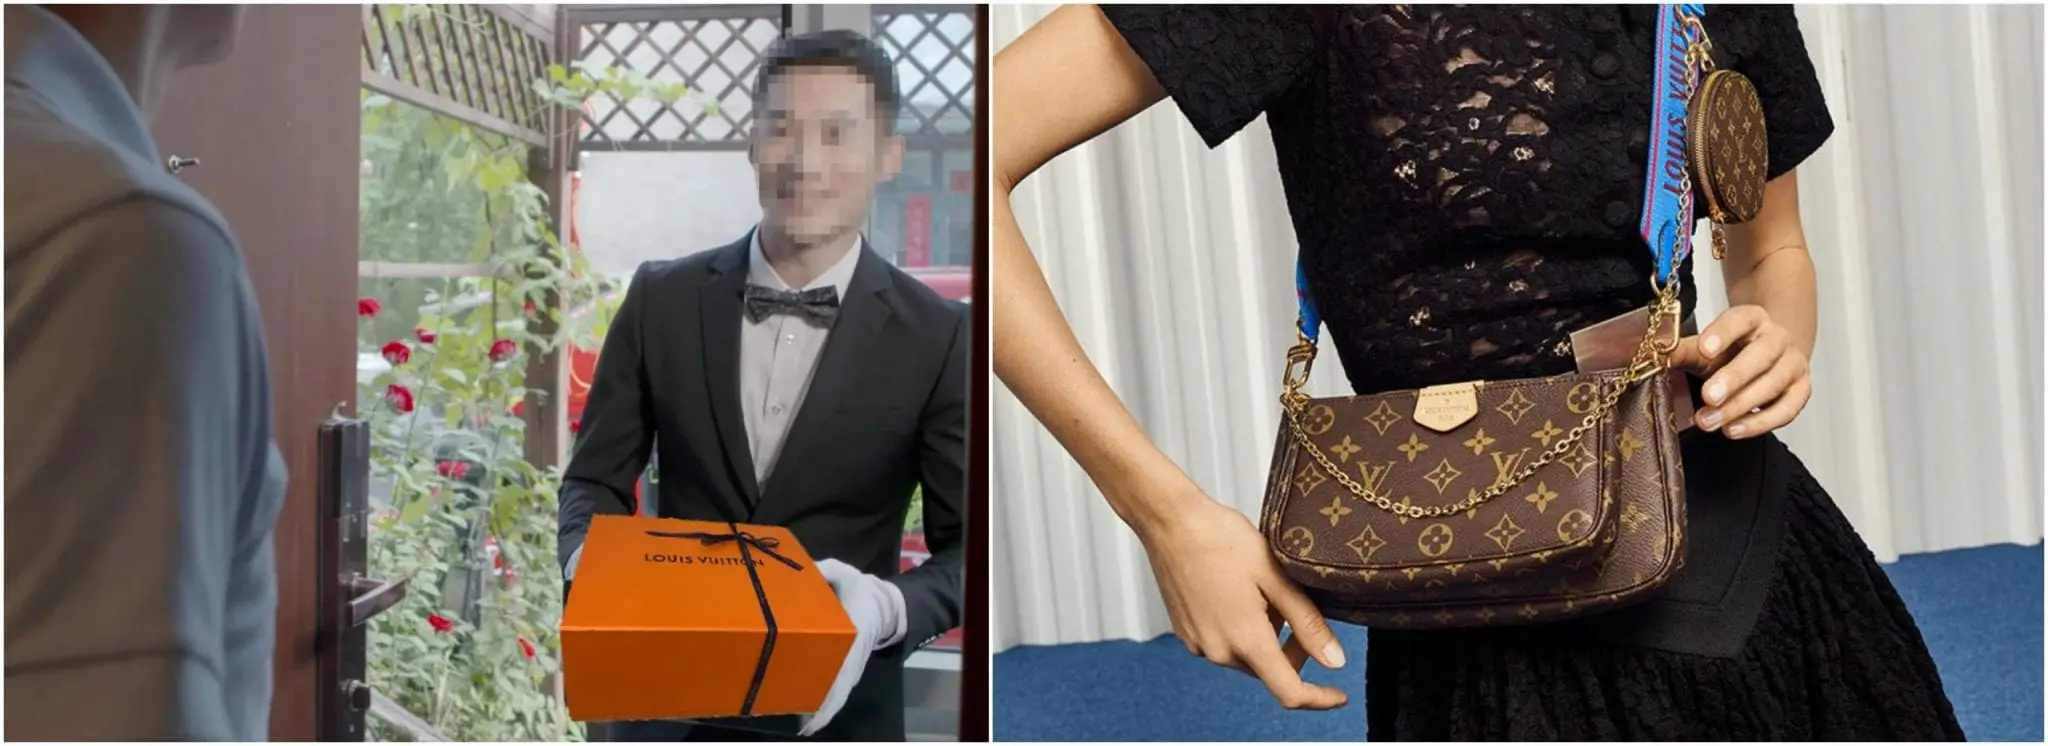 Louis Vuitton S'pore Offers Same-Day Delivery By Handsome Man In Suit,  Items Can Be Engraved